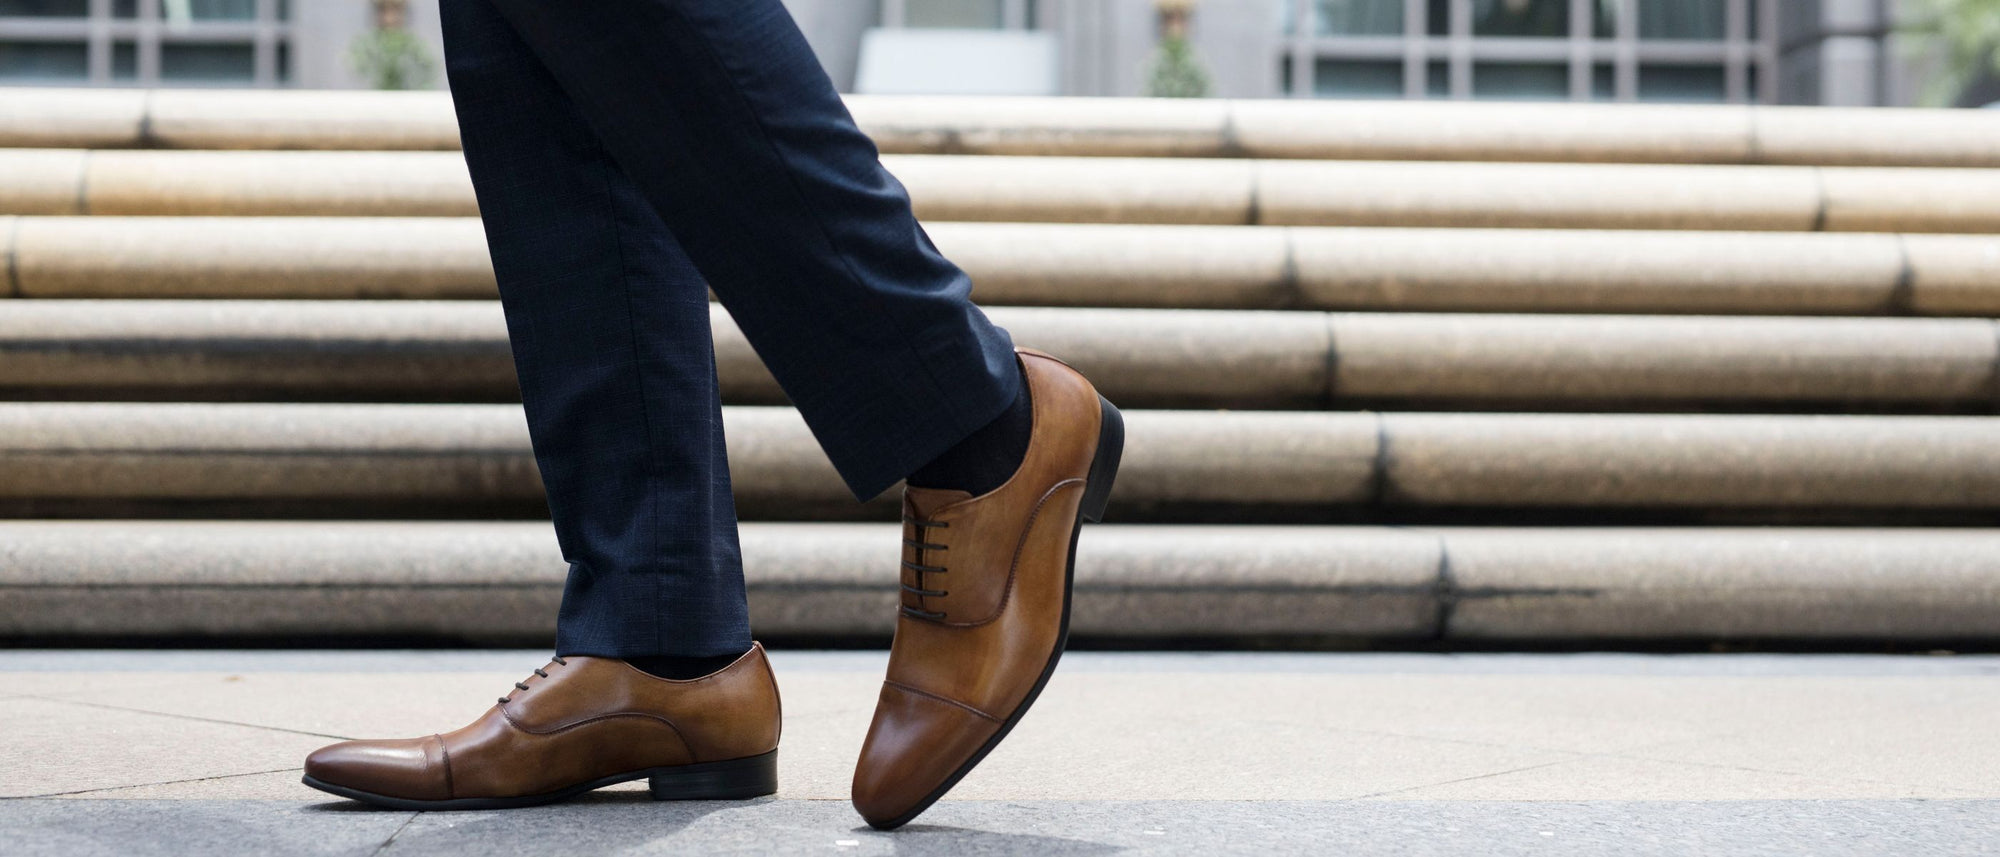 The Difference between Oxford and Derby Shoes